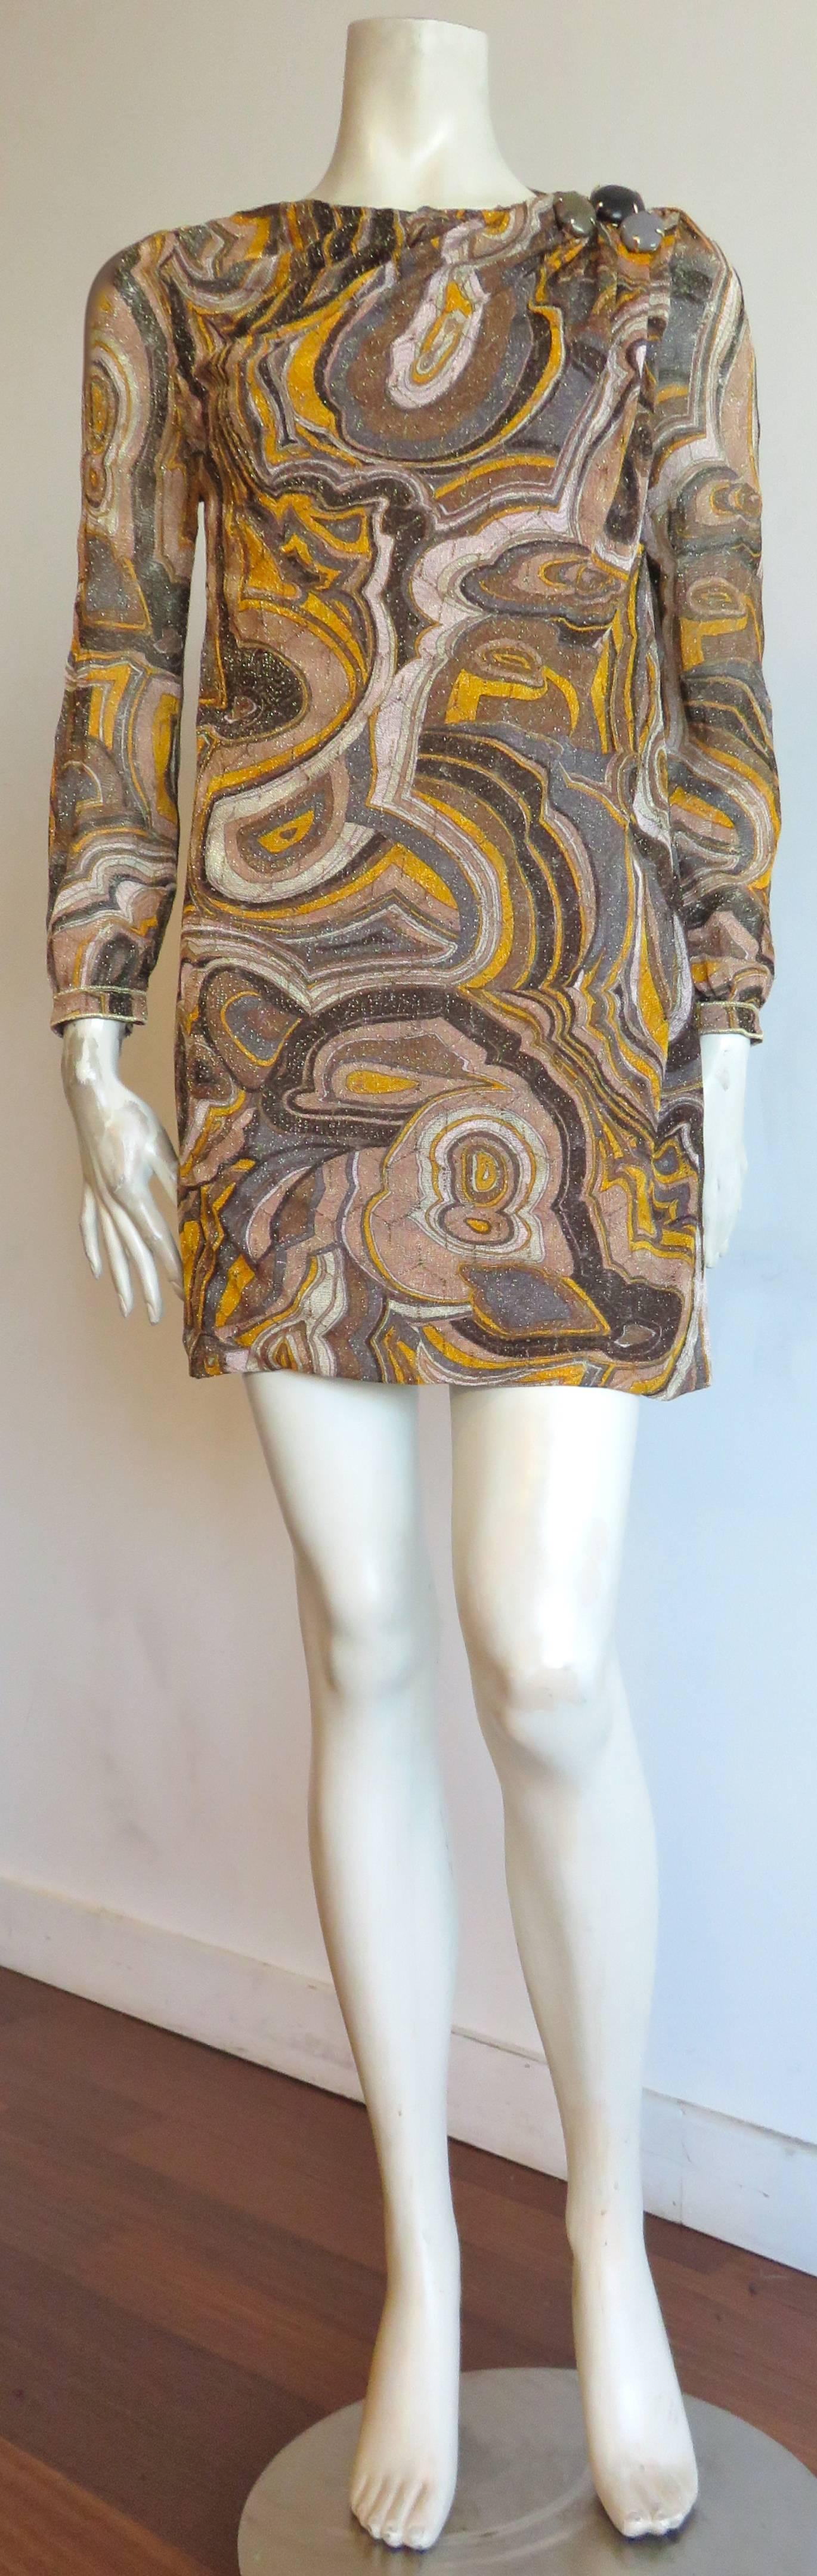 Worn once, MISSONI, agate-pattern, sparkly, knit, cocktail dress.

This amazing dress features an all-over, agate-pattern artwork in turquoise, olive green, goldenrod yellow, ivory, and beige, with an all-over metallic gold, sparkly